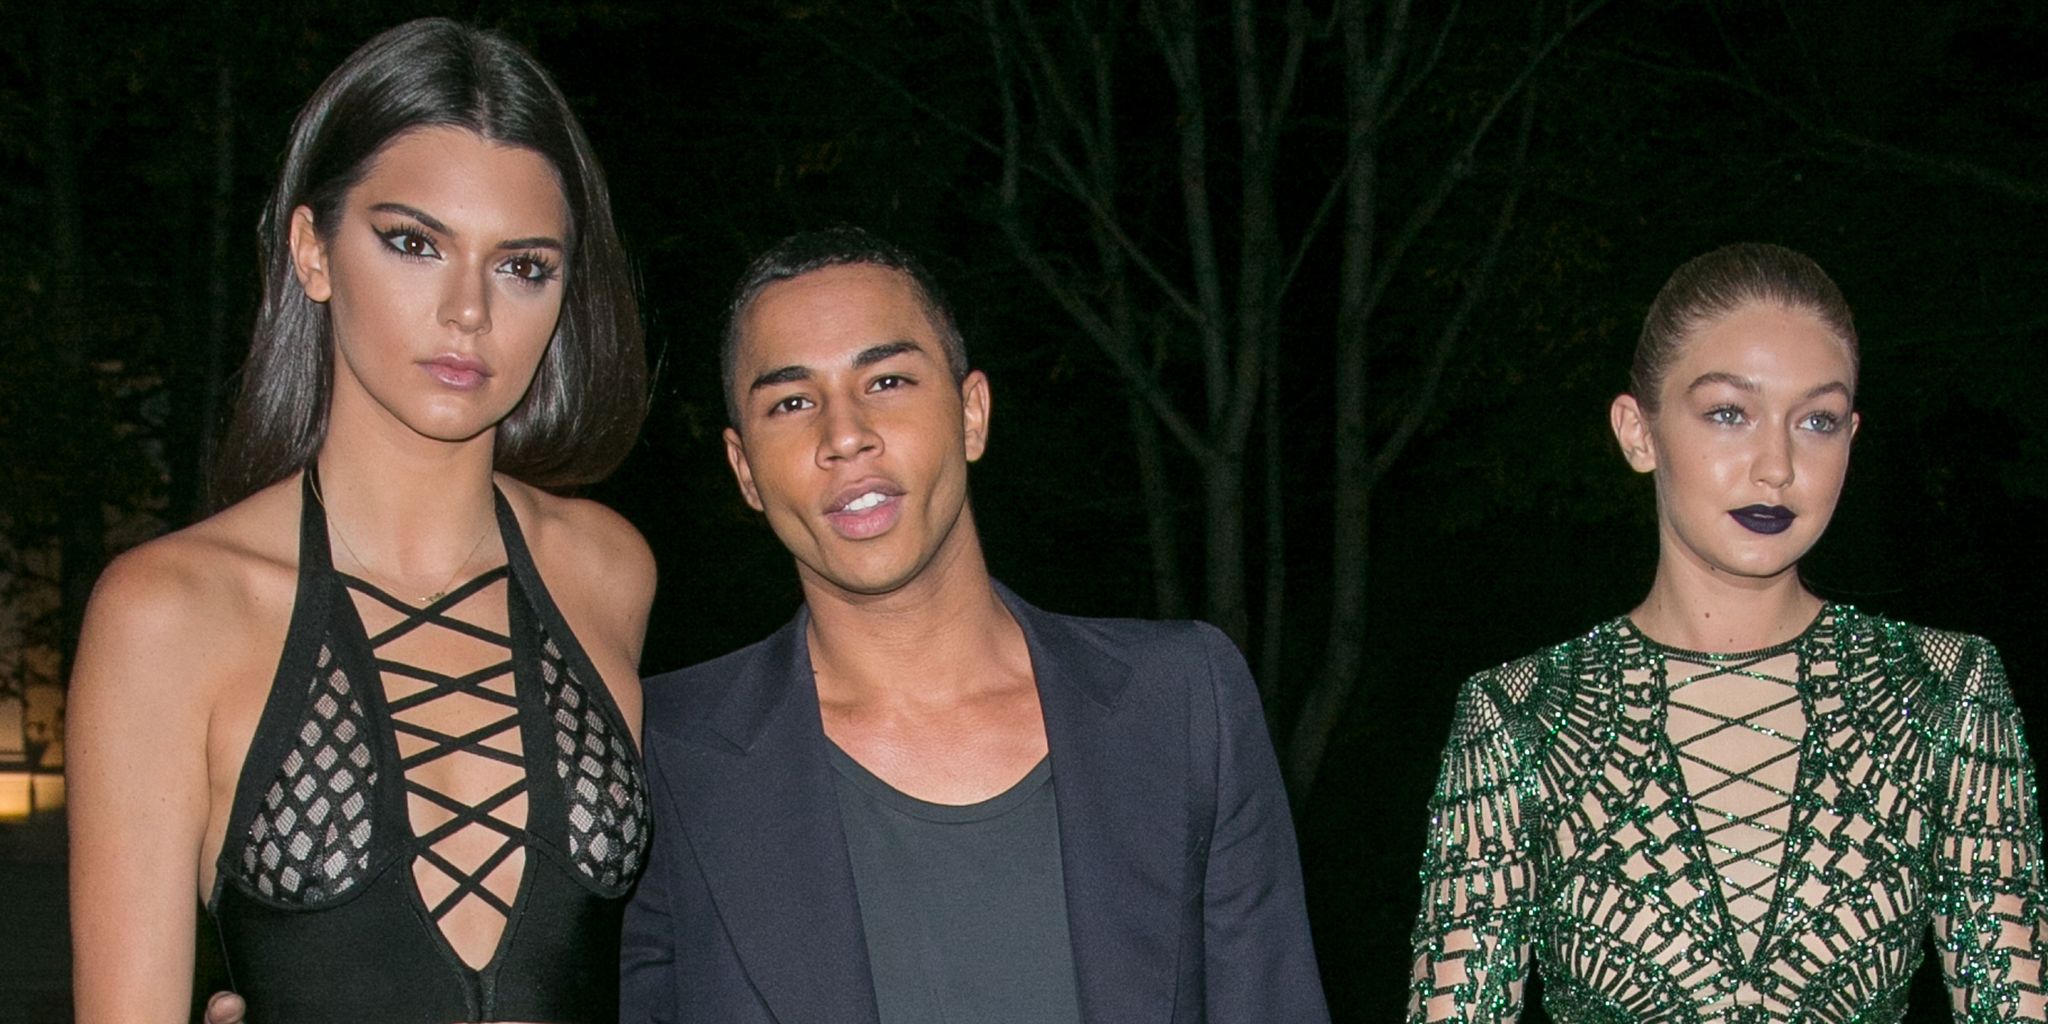 Olivier Rousteing, Kendall Jenner and Gigi Hadid